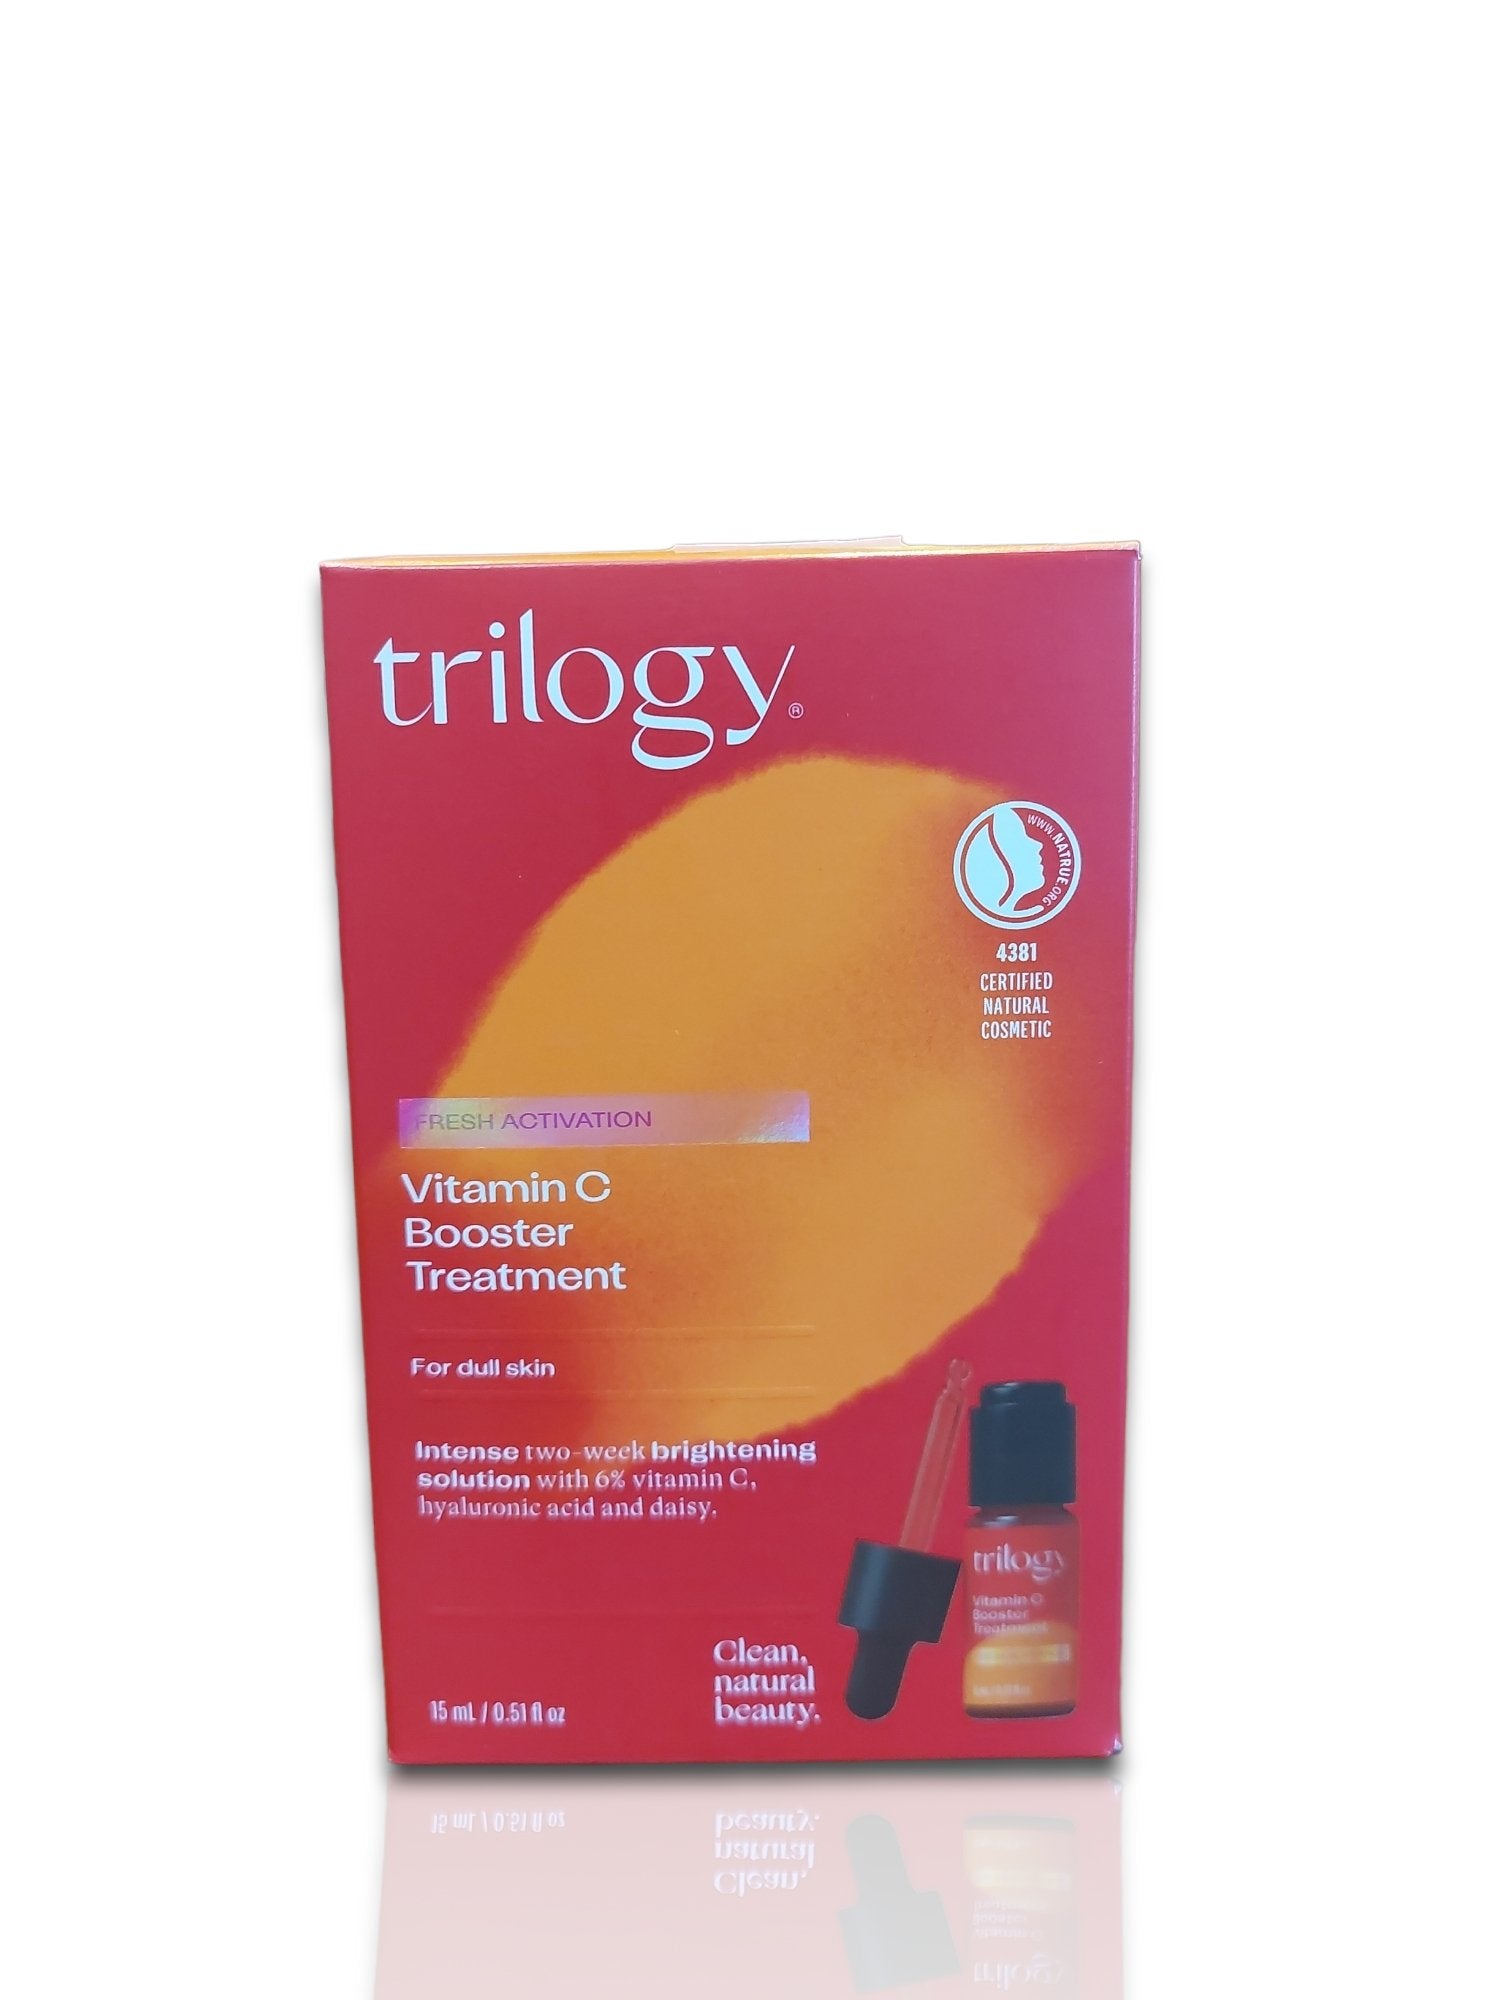 Trilogy Vitamin C Booster Treatment - Healthy Living